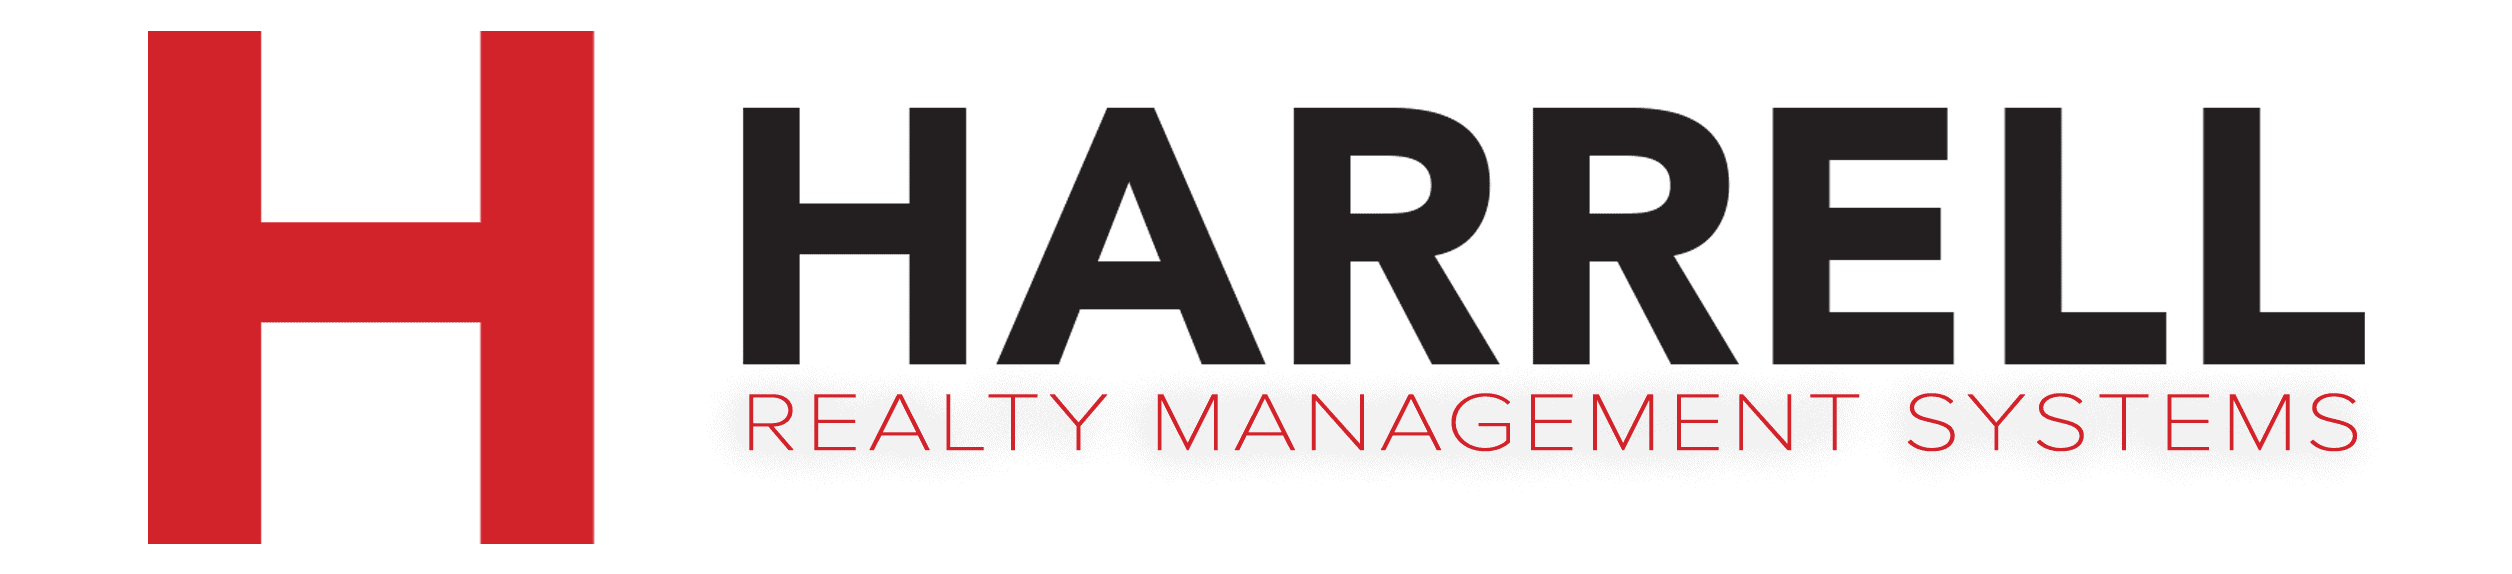 Harrell-Realty-Management-Systems